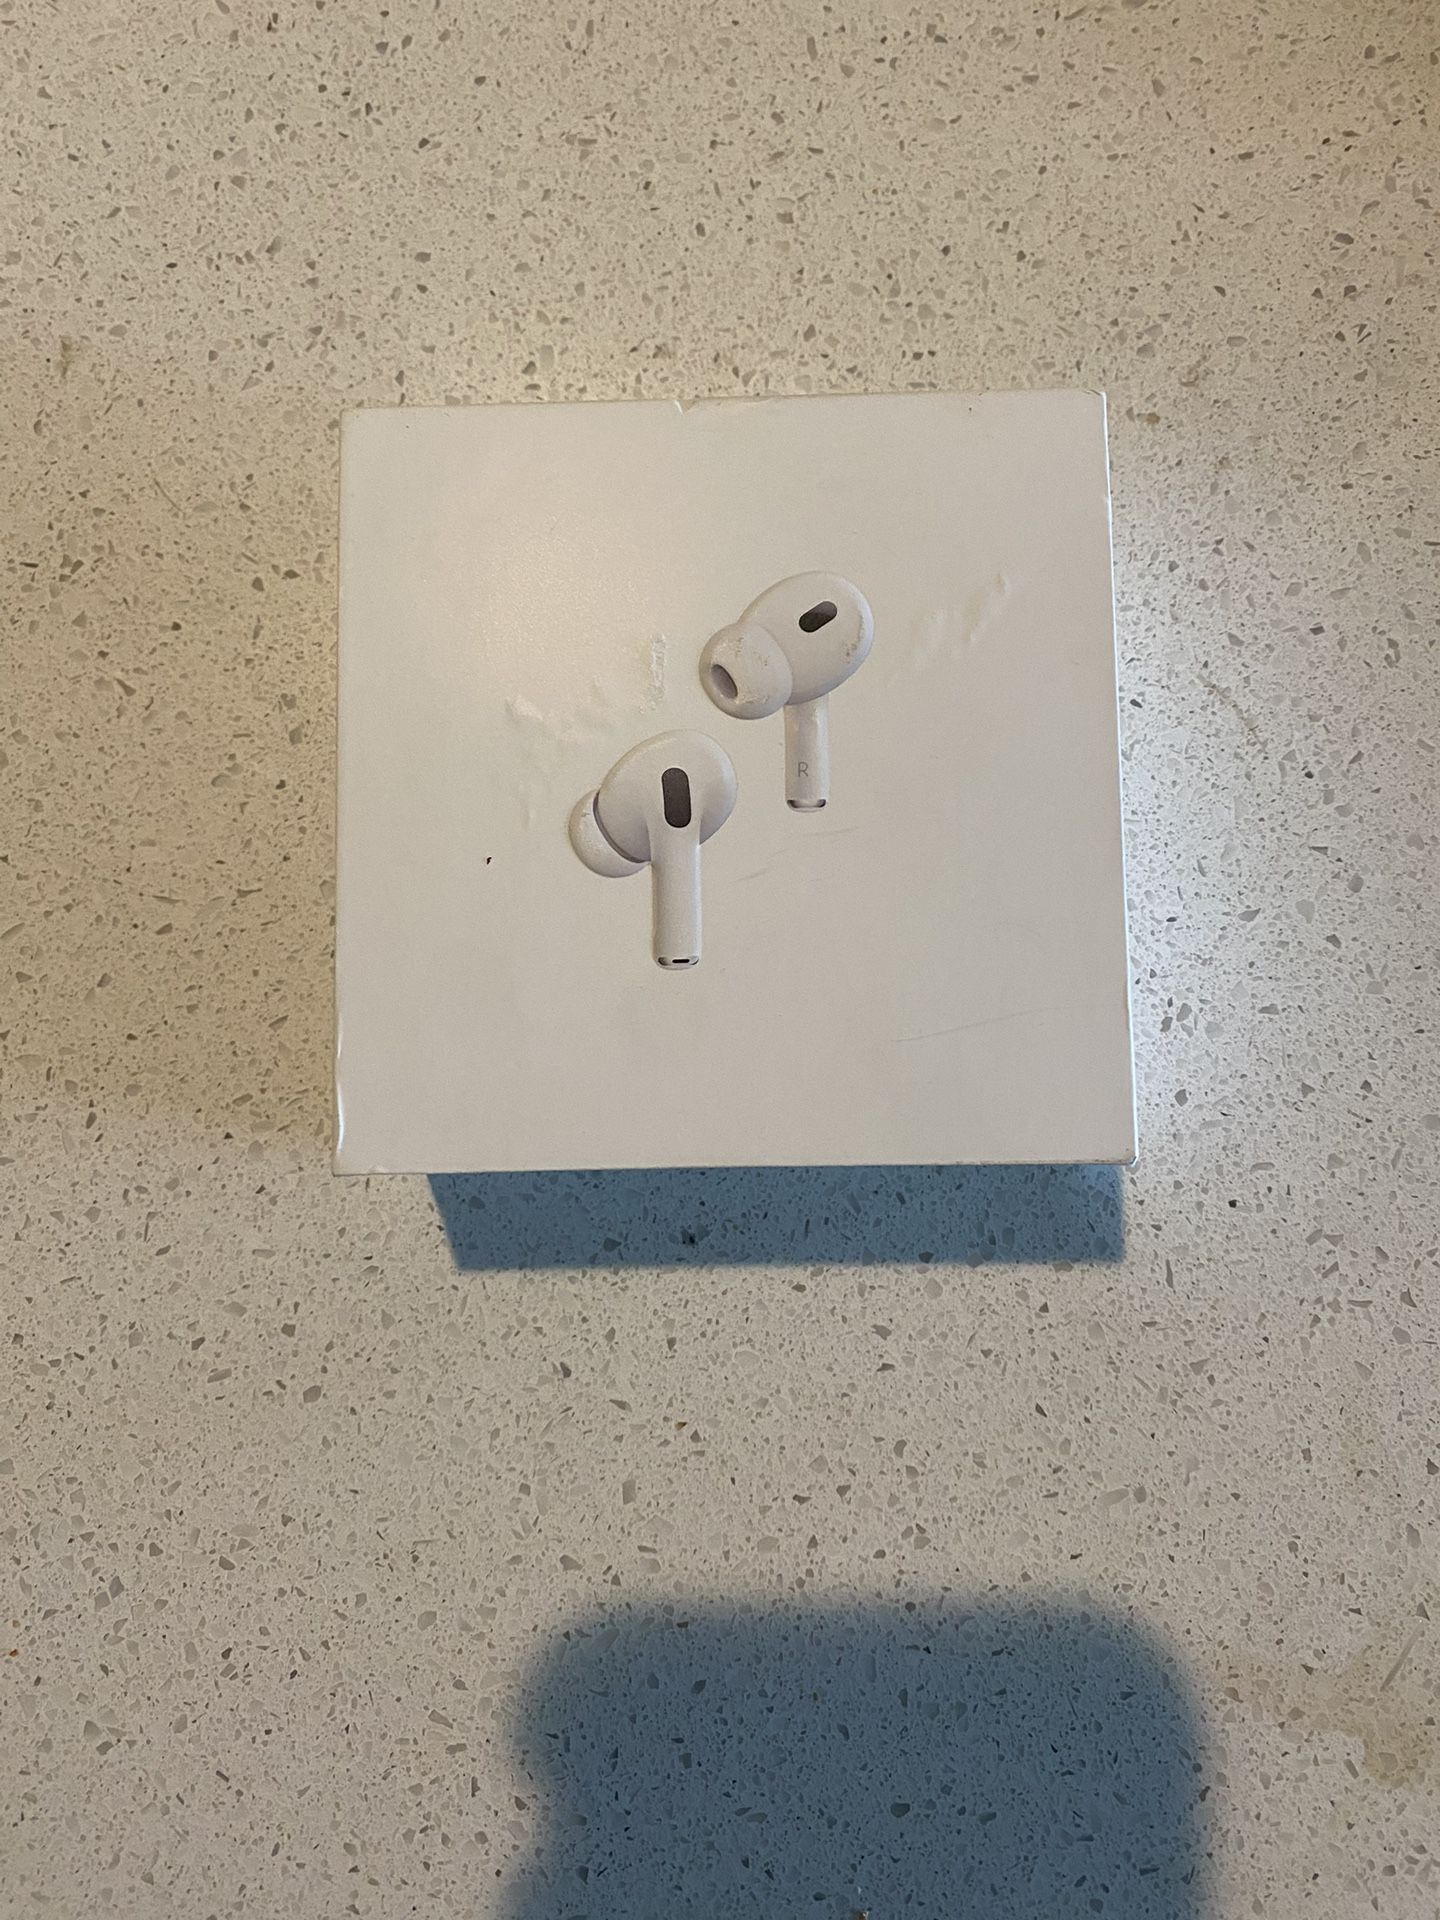    AirPods Pro (2nd generation) with MagSafe Charging Case (USB-C)